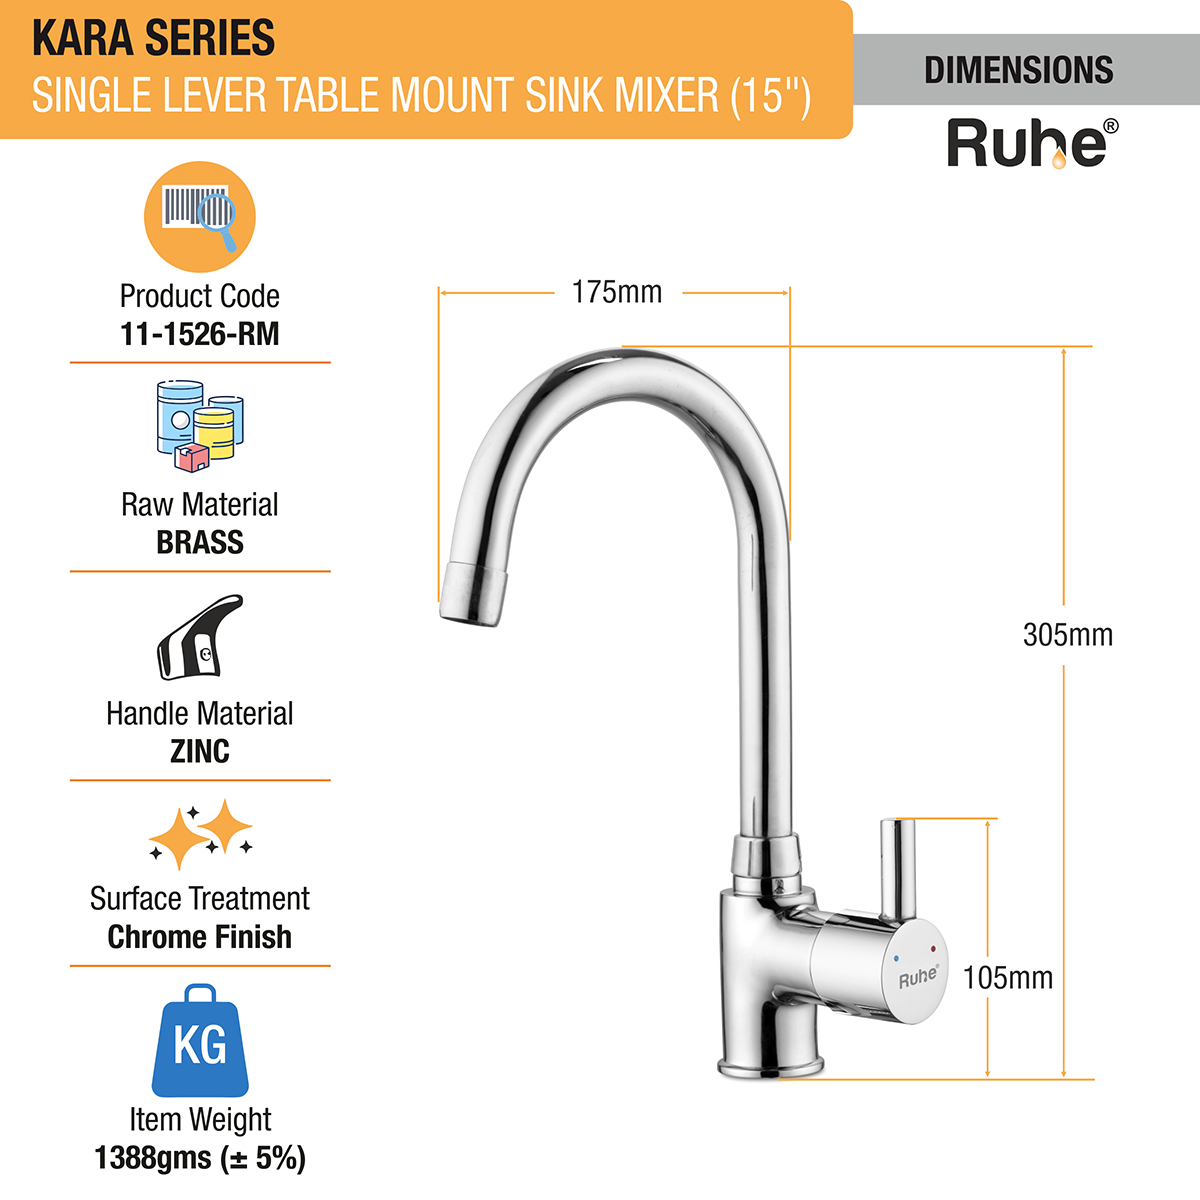 Kara Single Lever Table-Mount Sink Mixer with Medium (15 Inches) Round Swivel Spout Brass Faucet dimensions and sizes